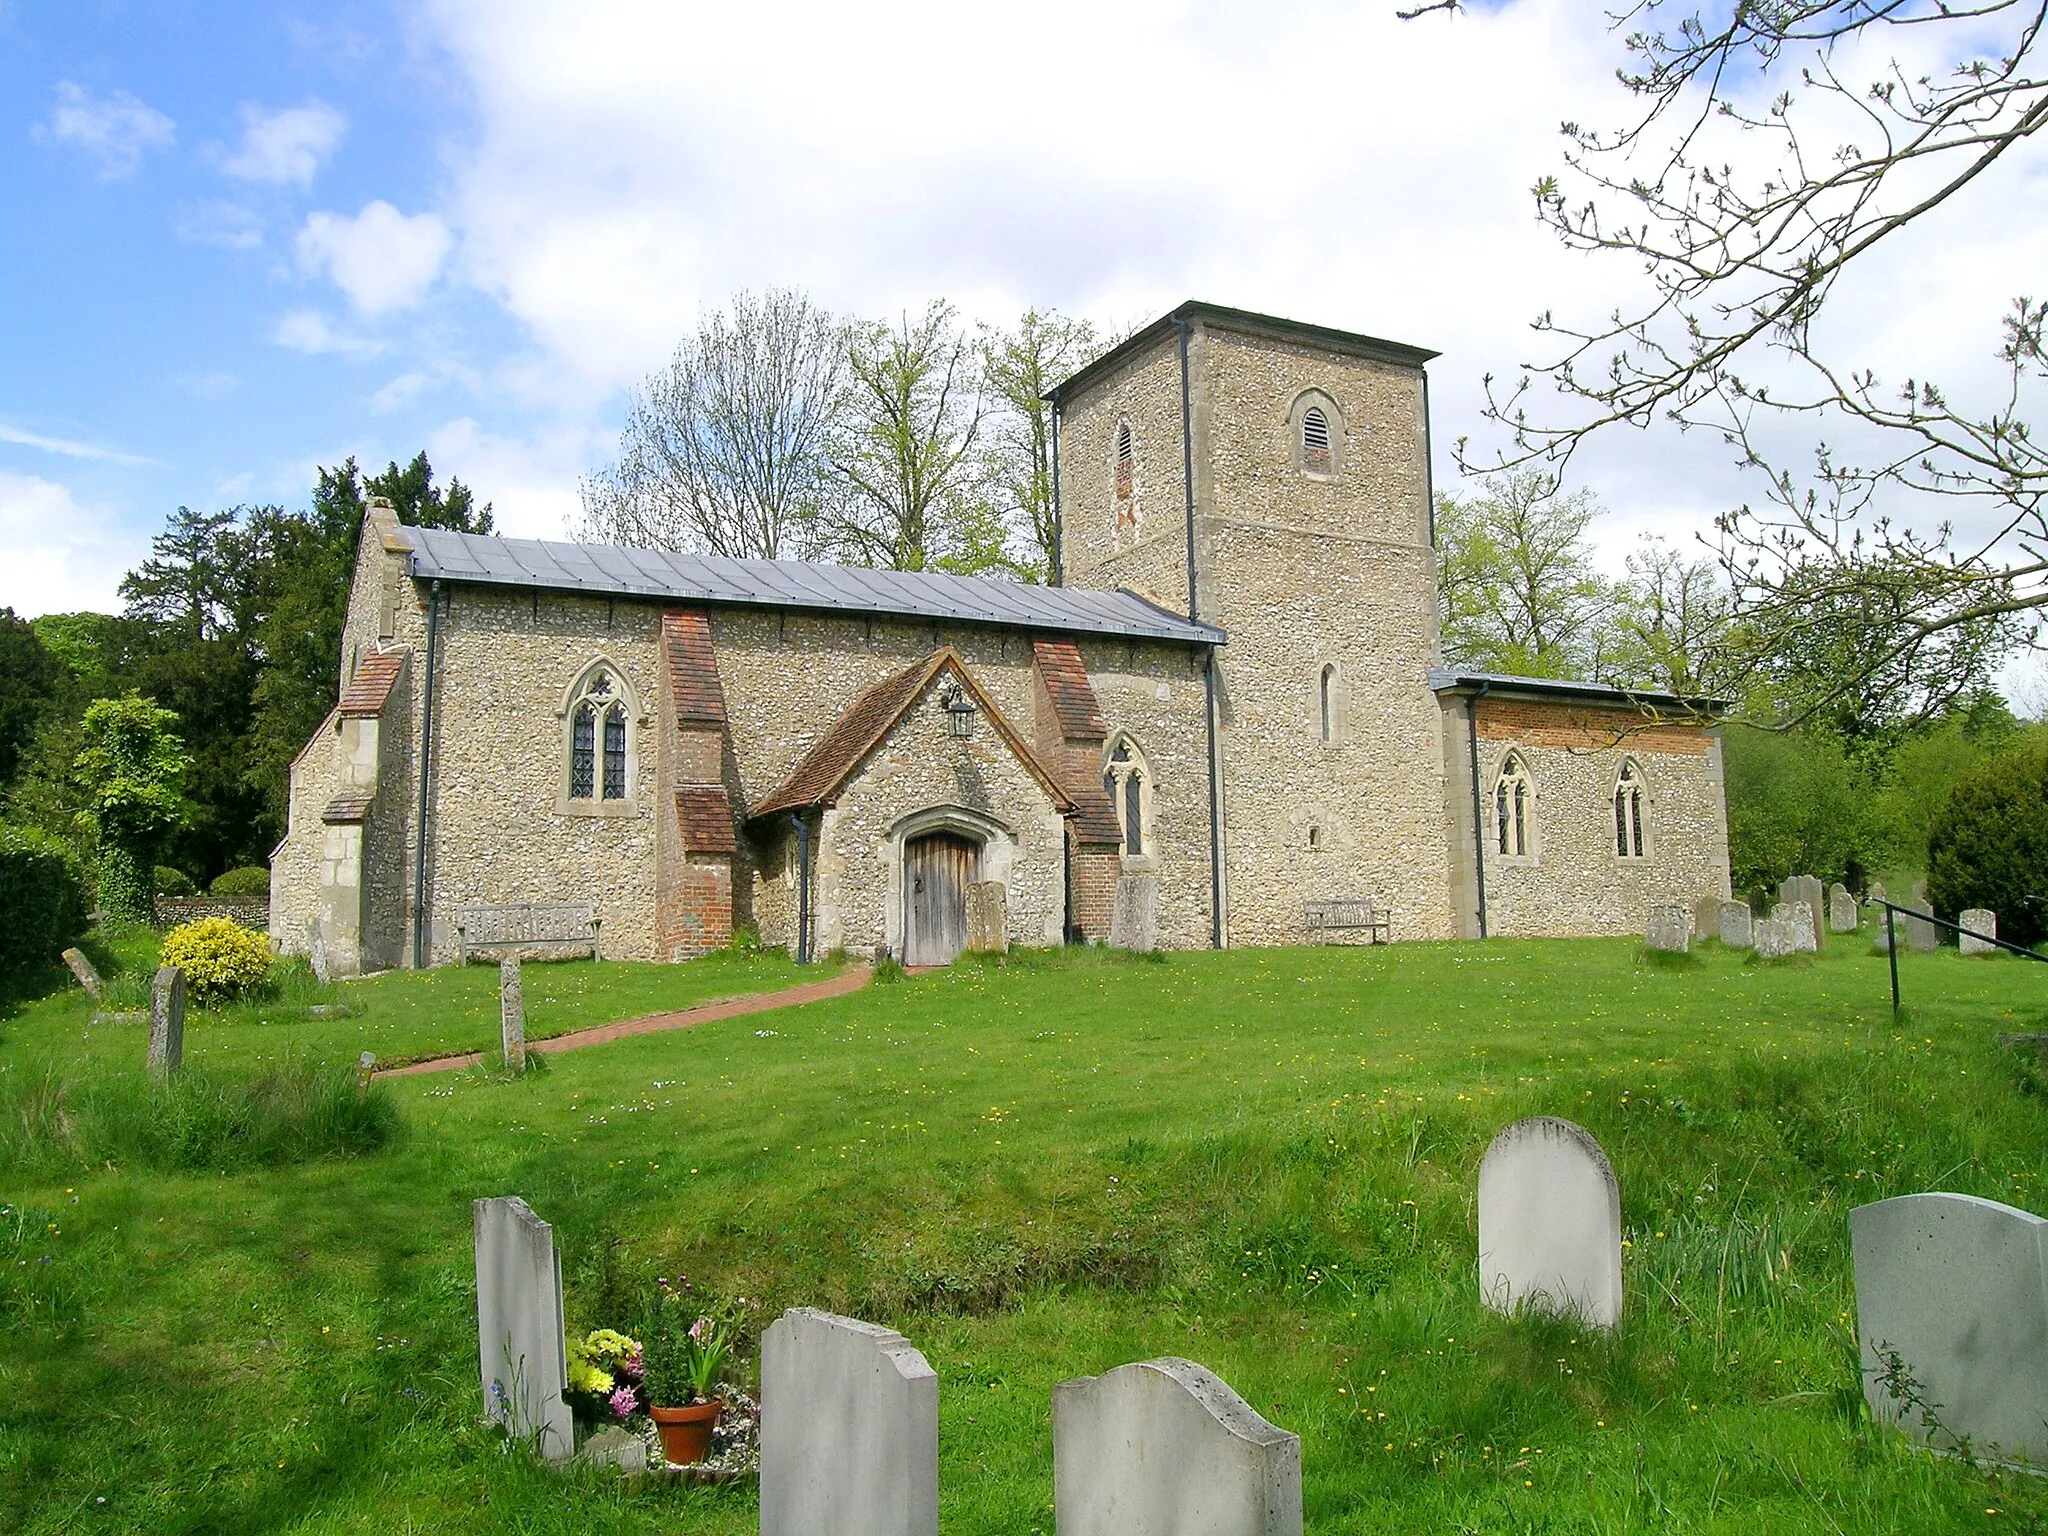 Photo showing: View of the exterior of the early 13th century parish church of St Mary the Virgin at Radnage, Bucks, England from the south